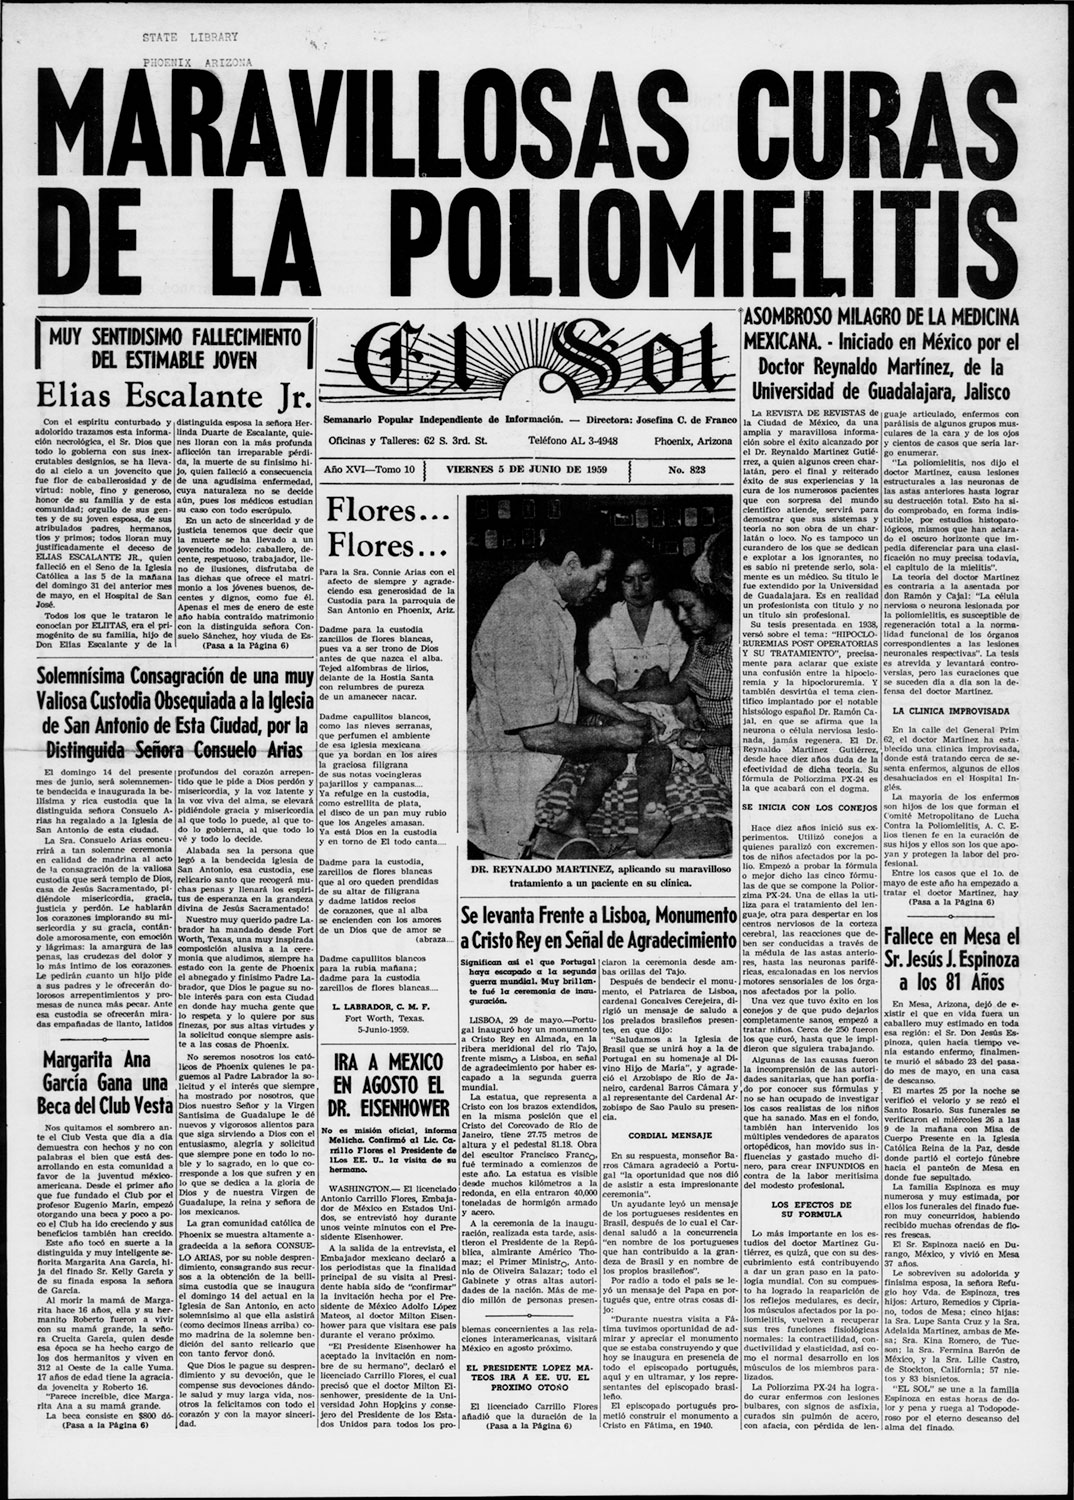 El Sol newspaper front page with a header in bold black letters that reads, “Maravillosas curas de la poliomielitis.” Below the header and the newspaper’s name is a dark black and white photograph that shows a man dressed in white administering an injection on the leg of a child held by two women.